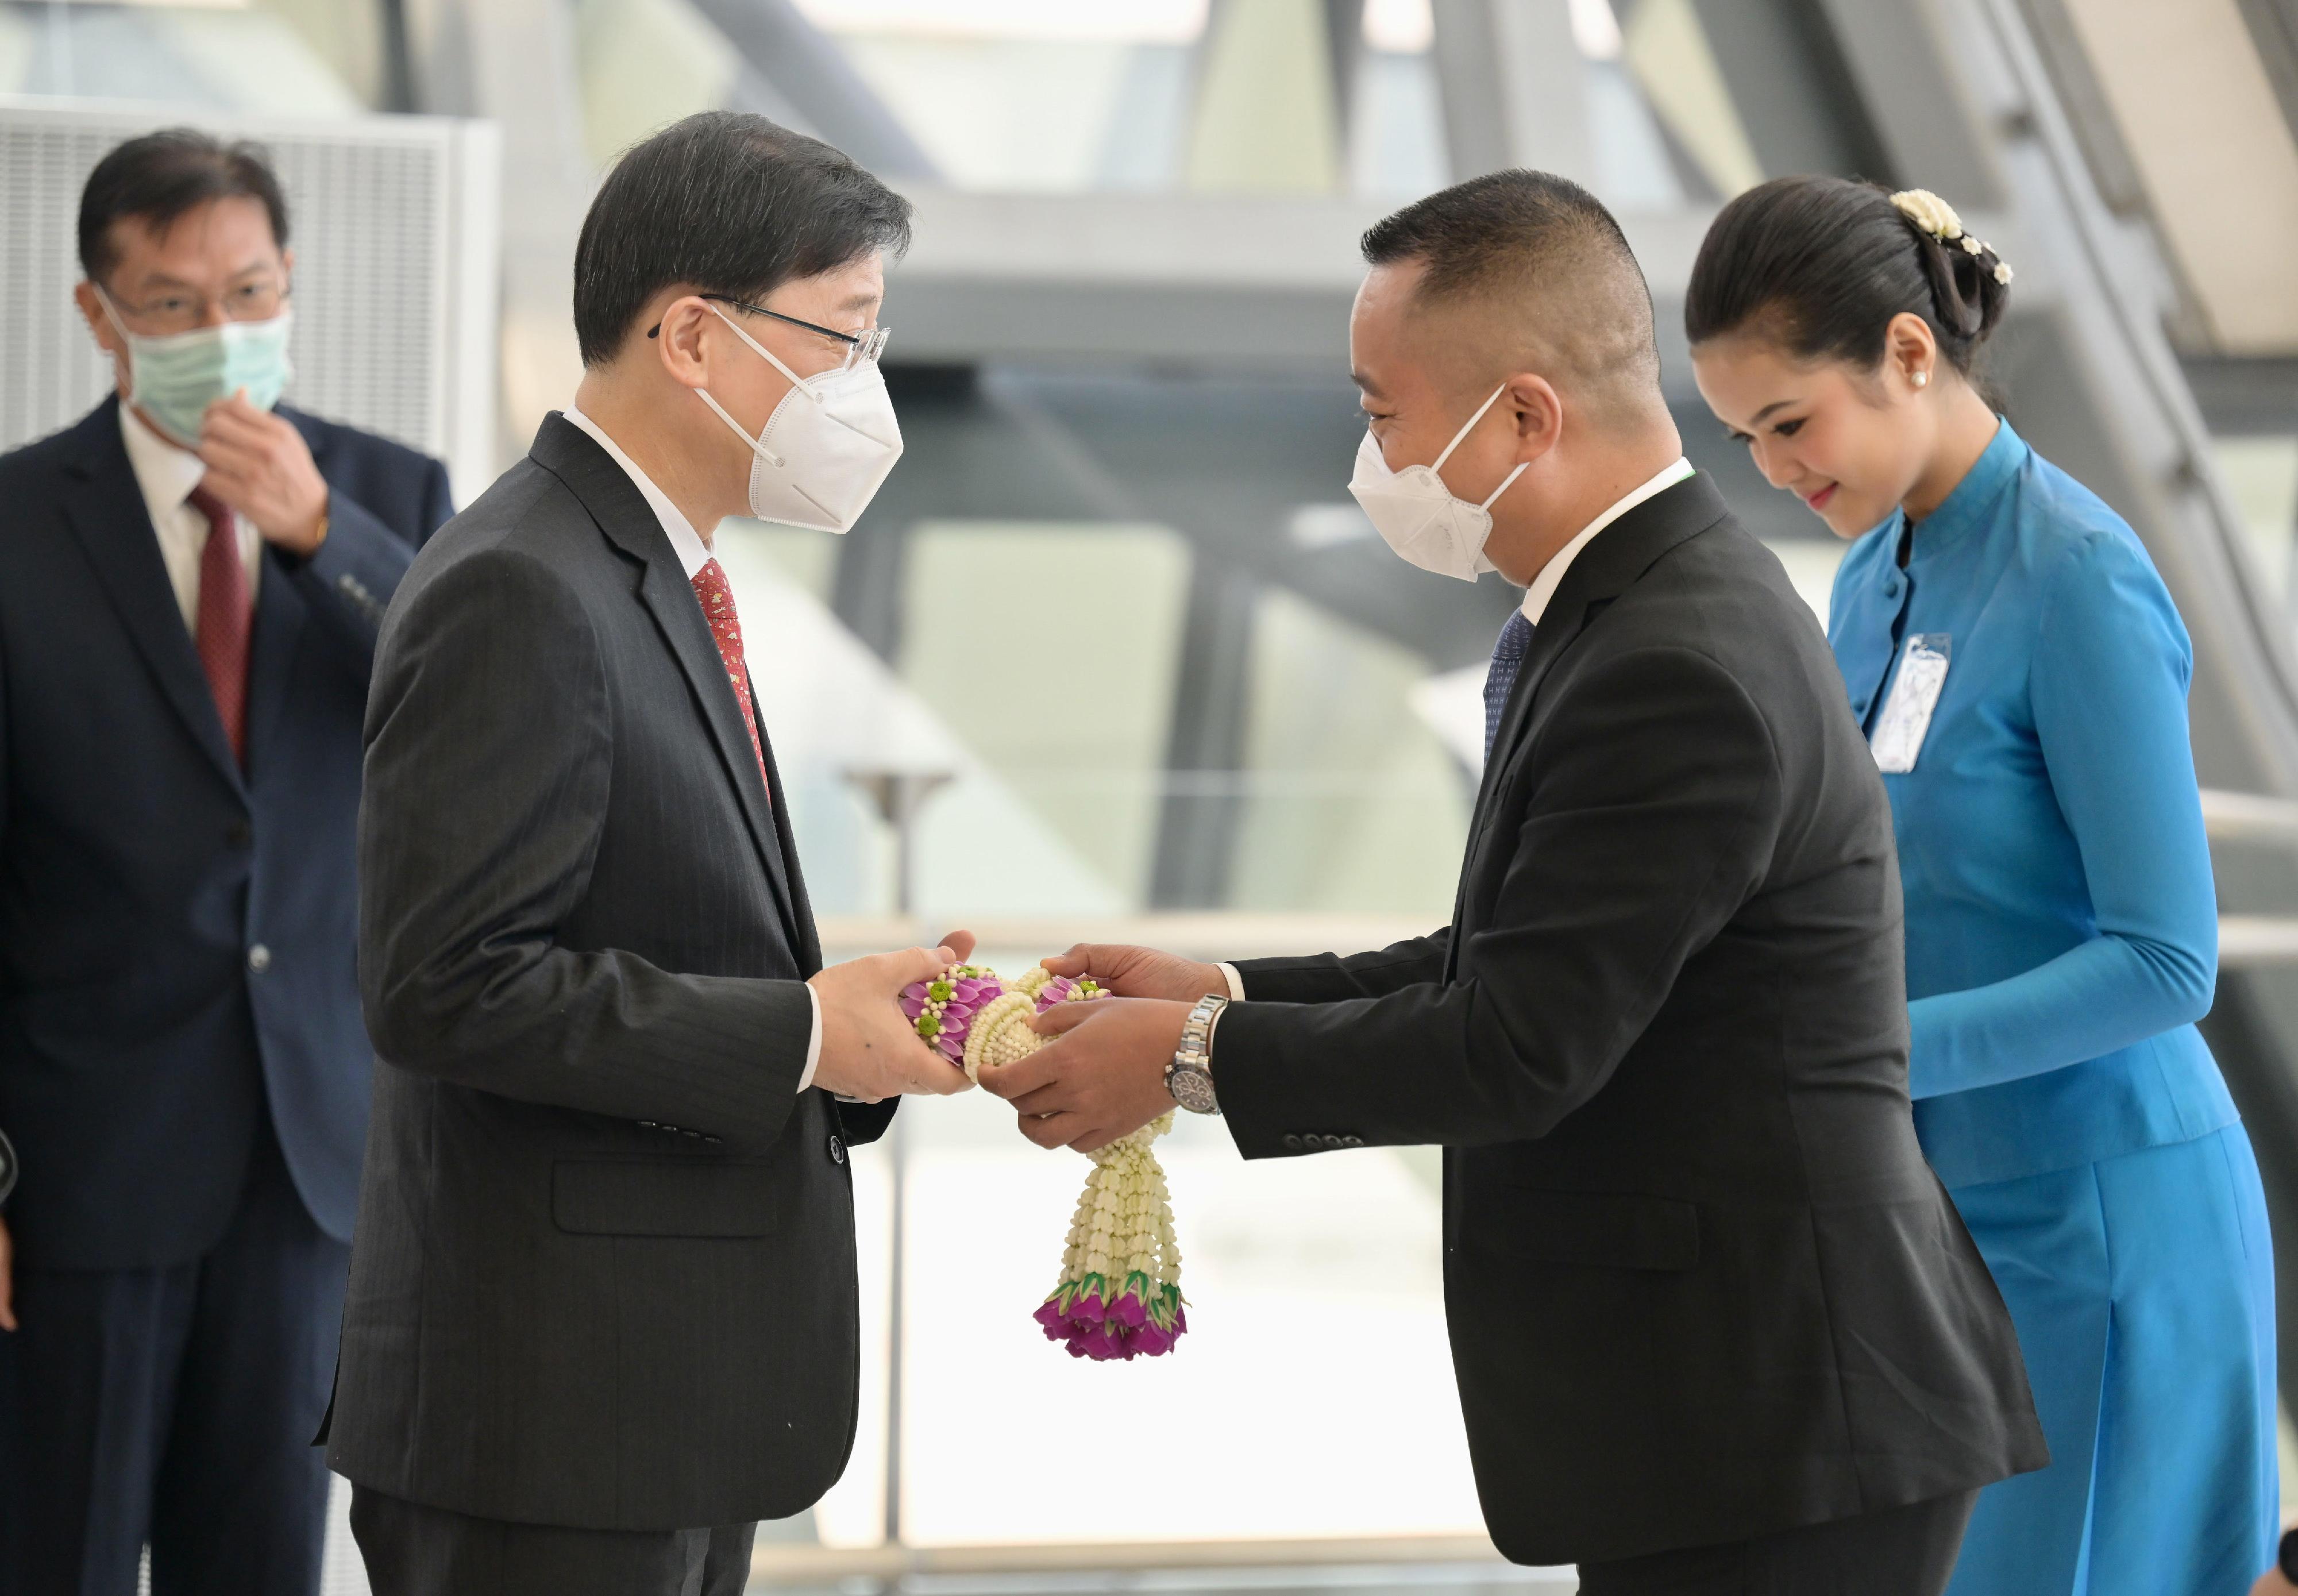 The Chief Executive, Mr John Lee, arrived in Bangkok, Thailand, this morning (November 17) to attend the Asia-Pacific Economic Cooperation 2022 Economic Leaders’ Meeting and other related meetings. Photo shows Mr Lee (left) being greeted by the Vice Minister for Office of the Prime Minister of Thailand, Mr Ronaphop Patamadis (right), at the airport.